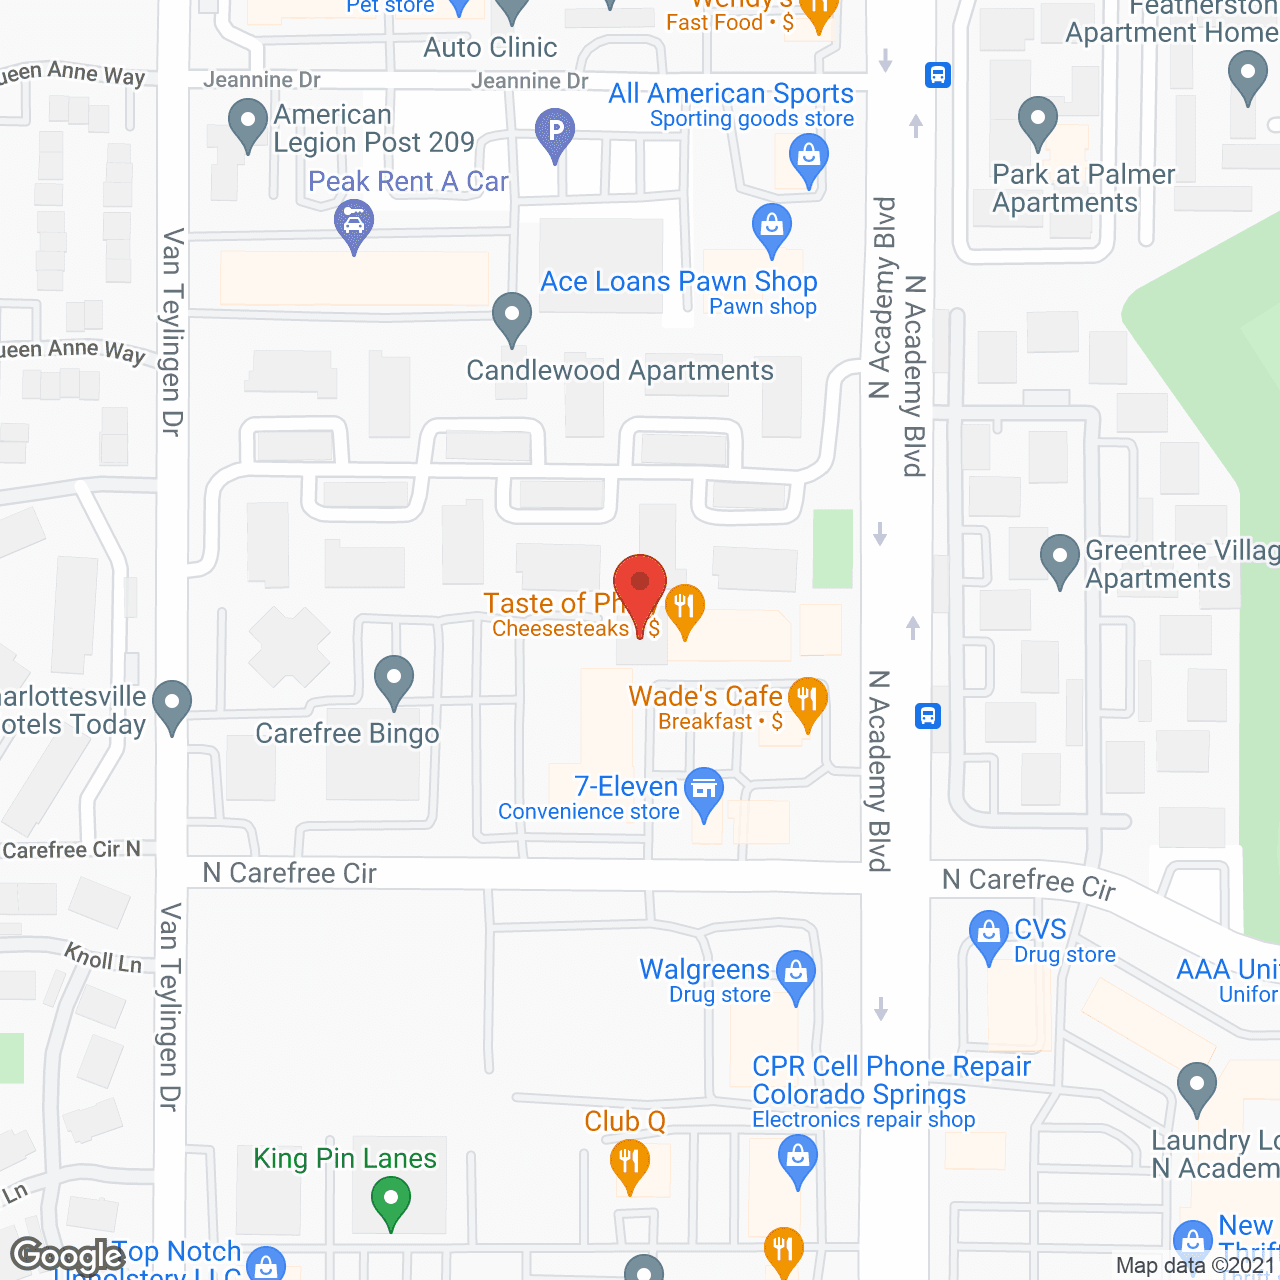 Goodwill At Home in google map